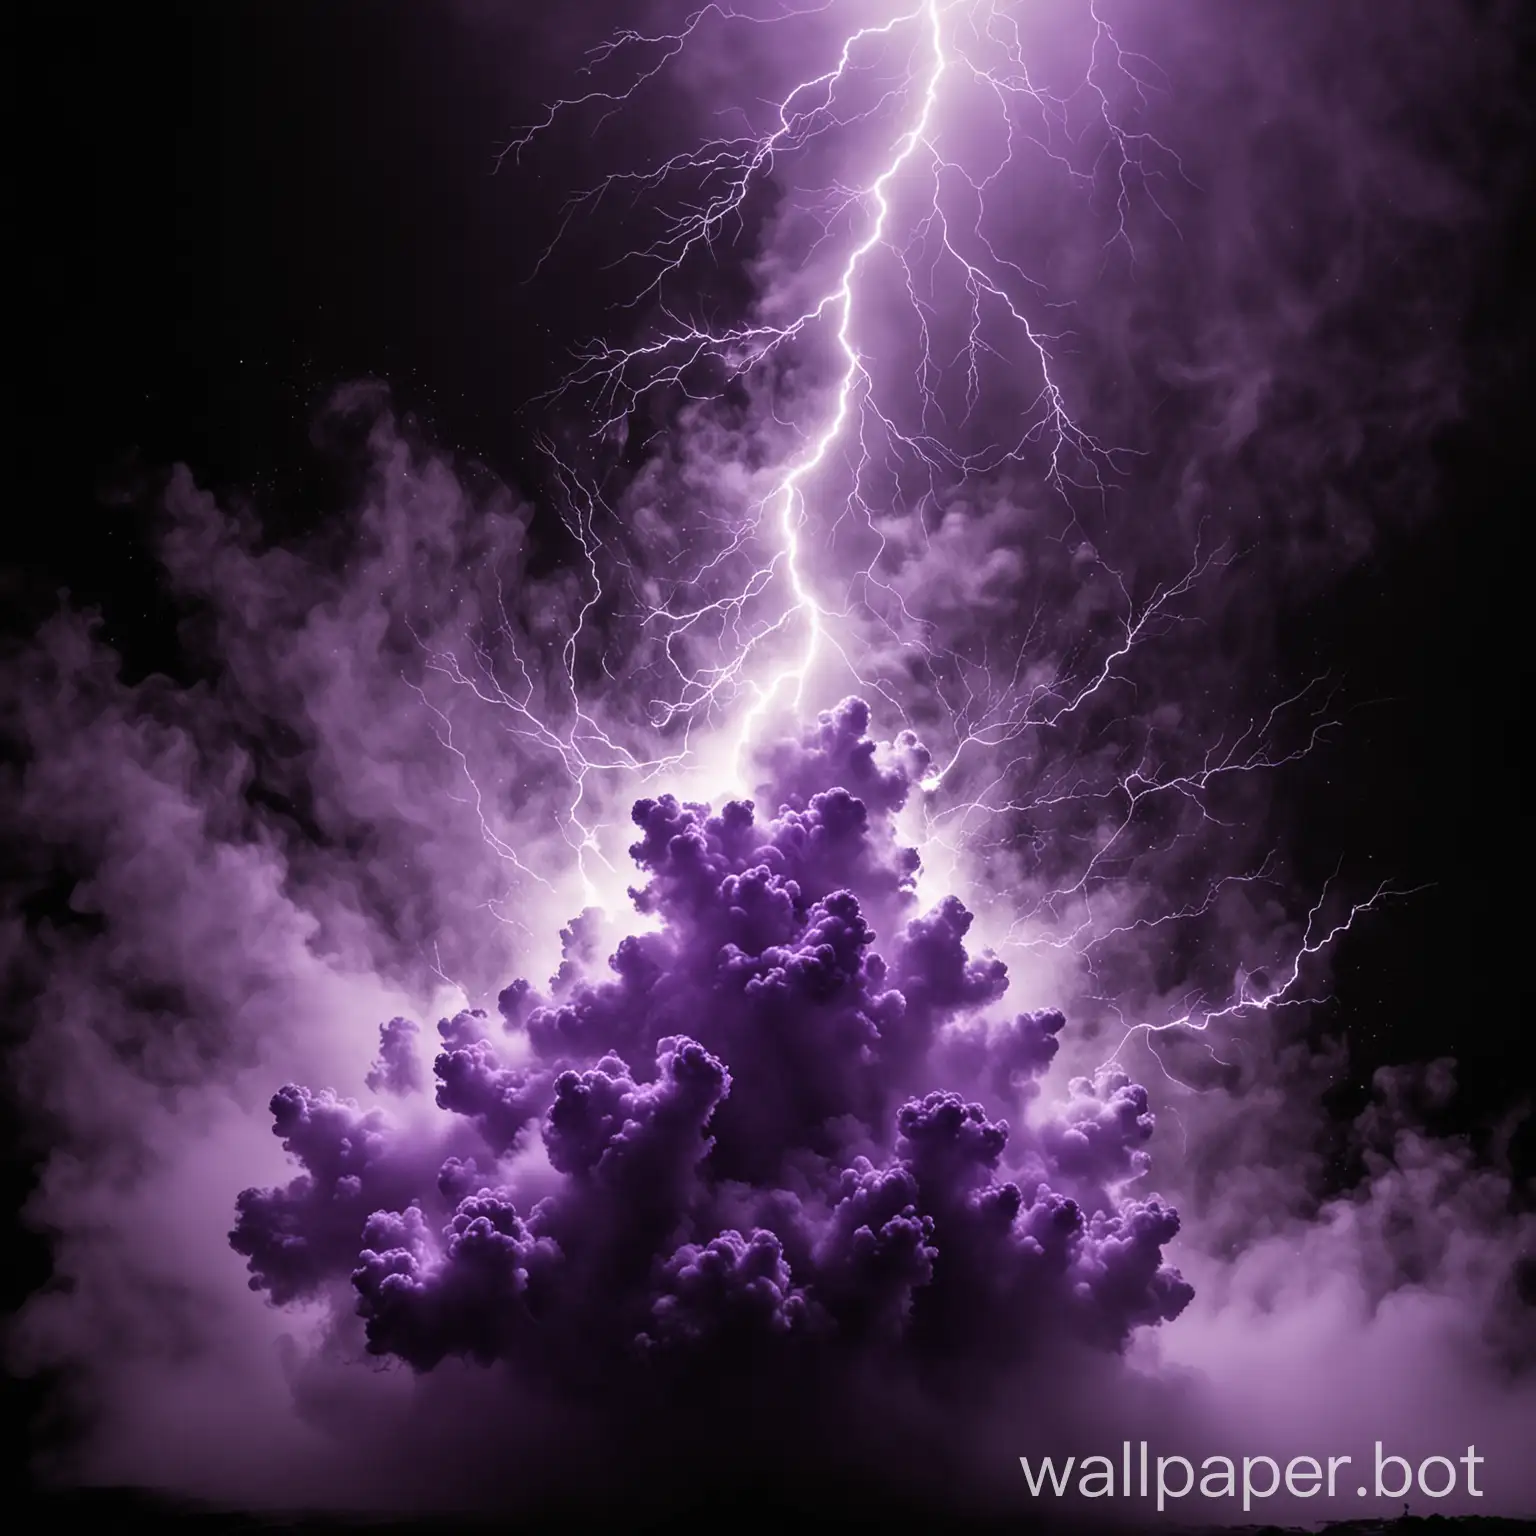 Draw several violet clusters of mist with lightning flashing in them on a black background.